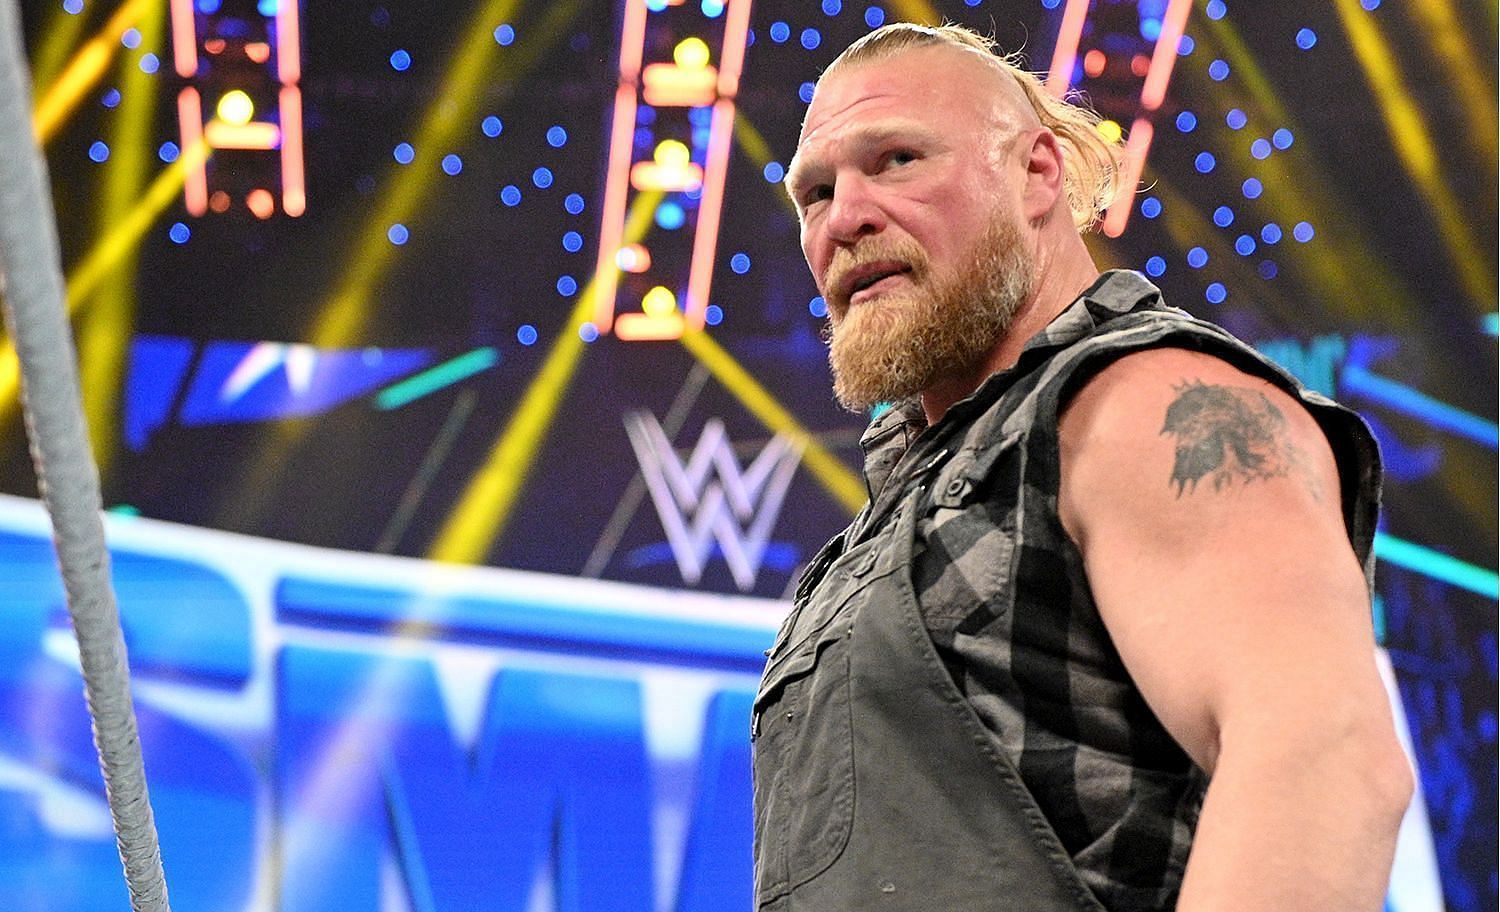 Brock Lesnar could walk out of WrestleMania as a double champion